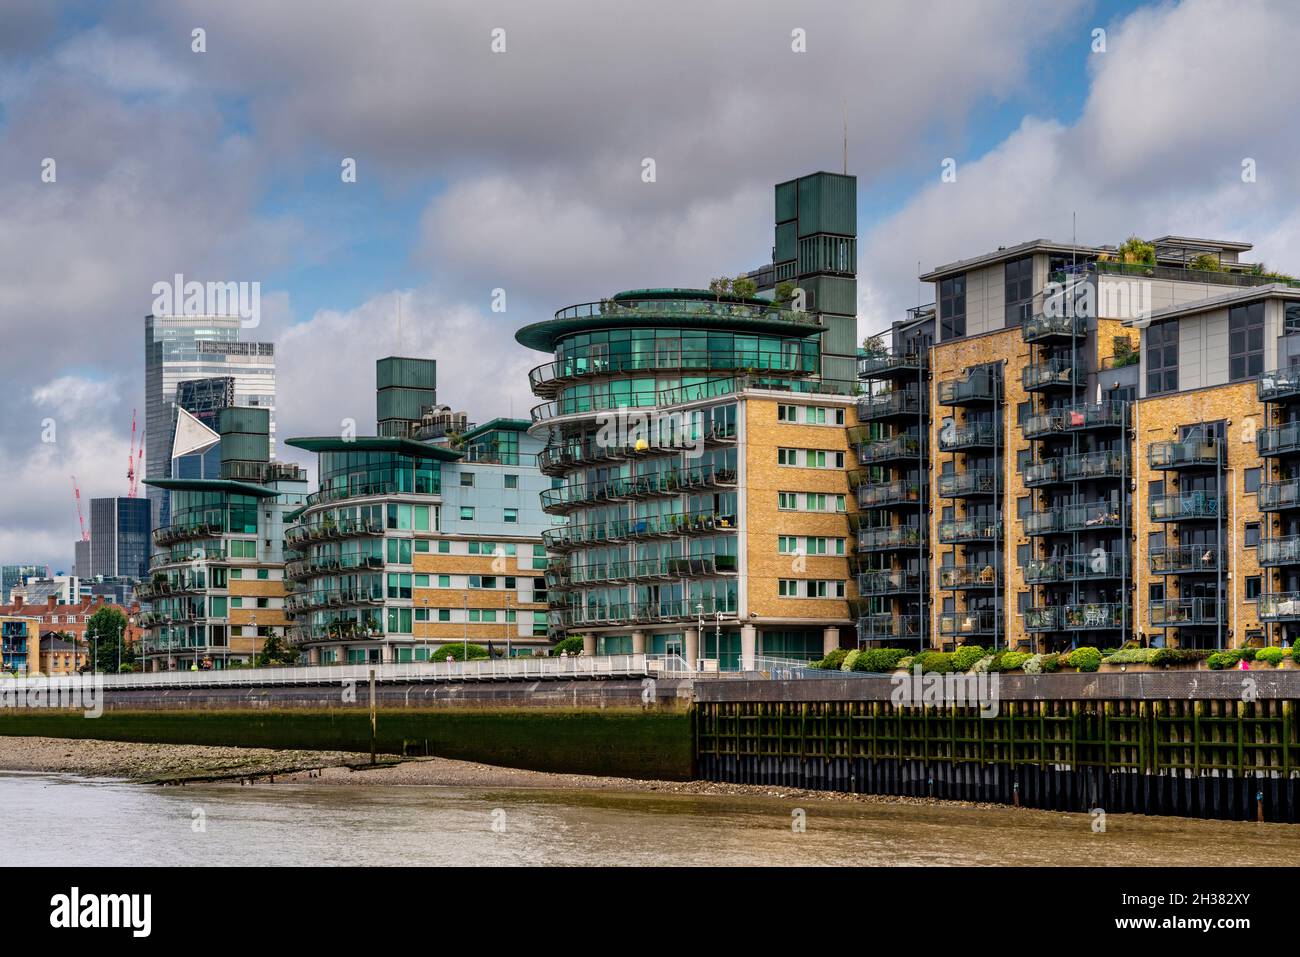 Residential Property On Canary Wharf, London, UK. Stock Photo